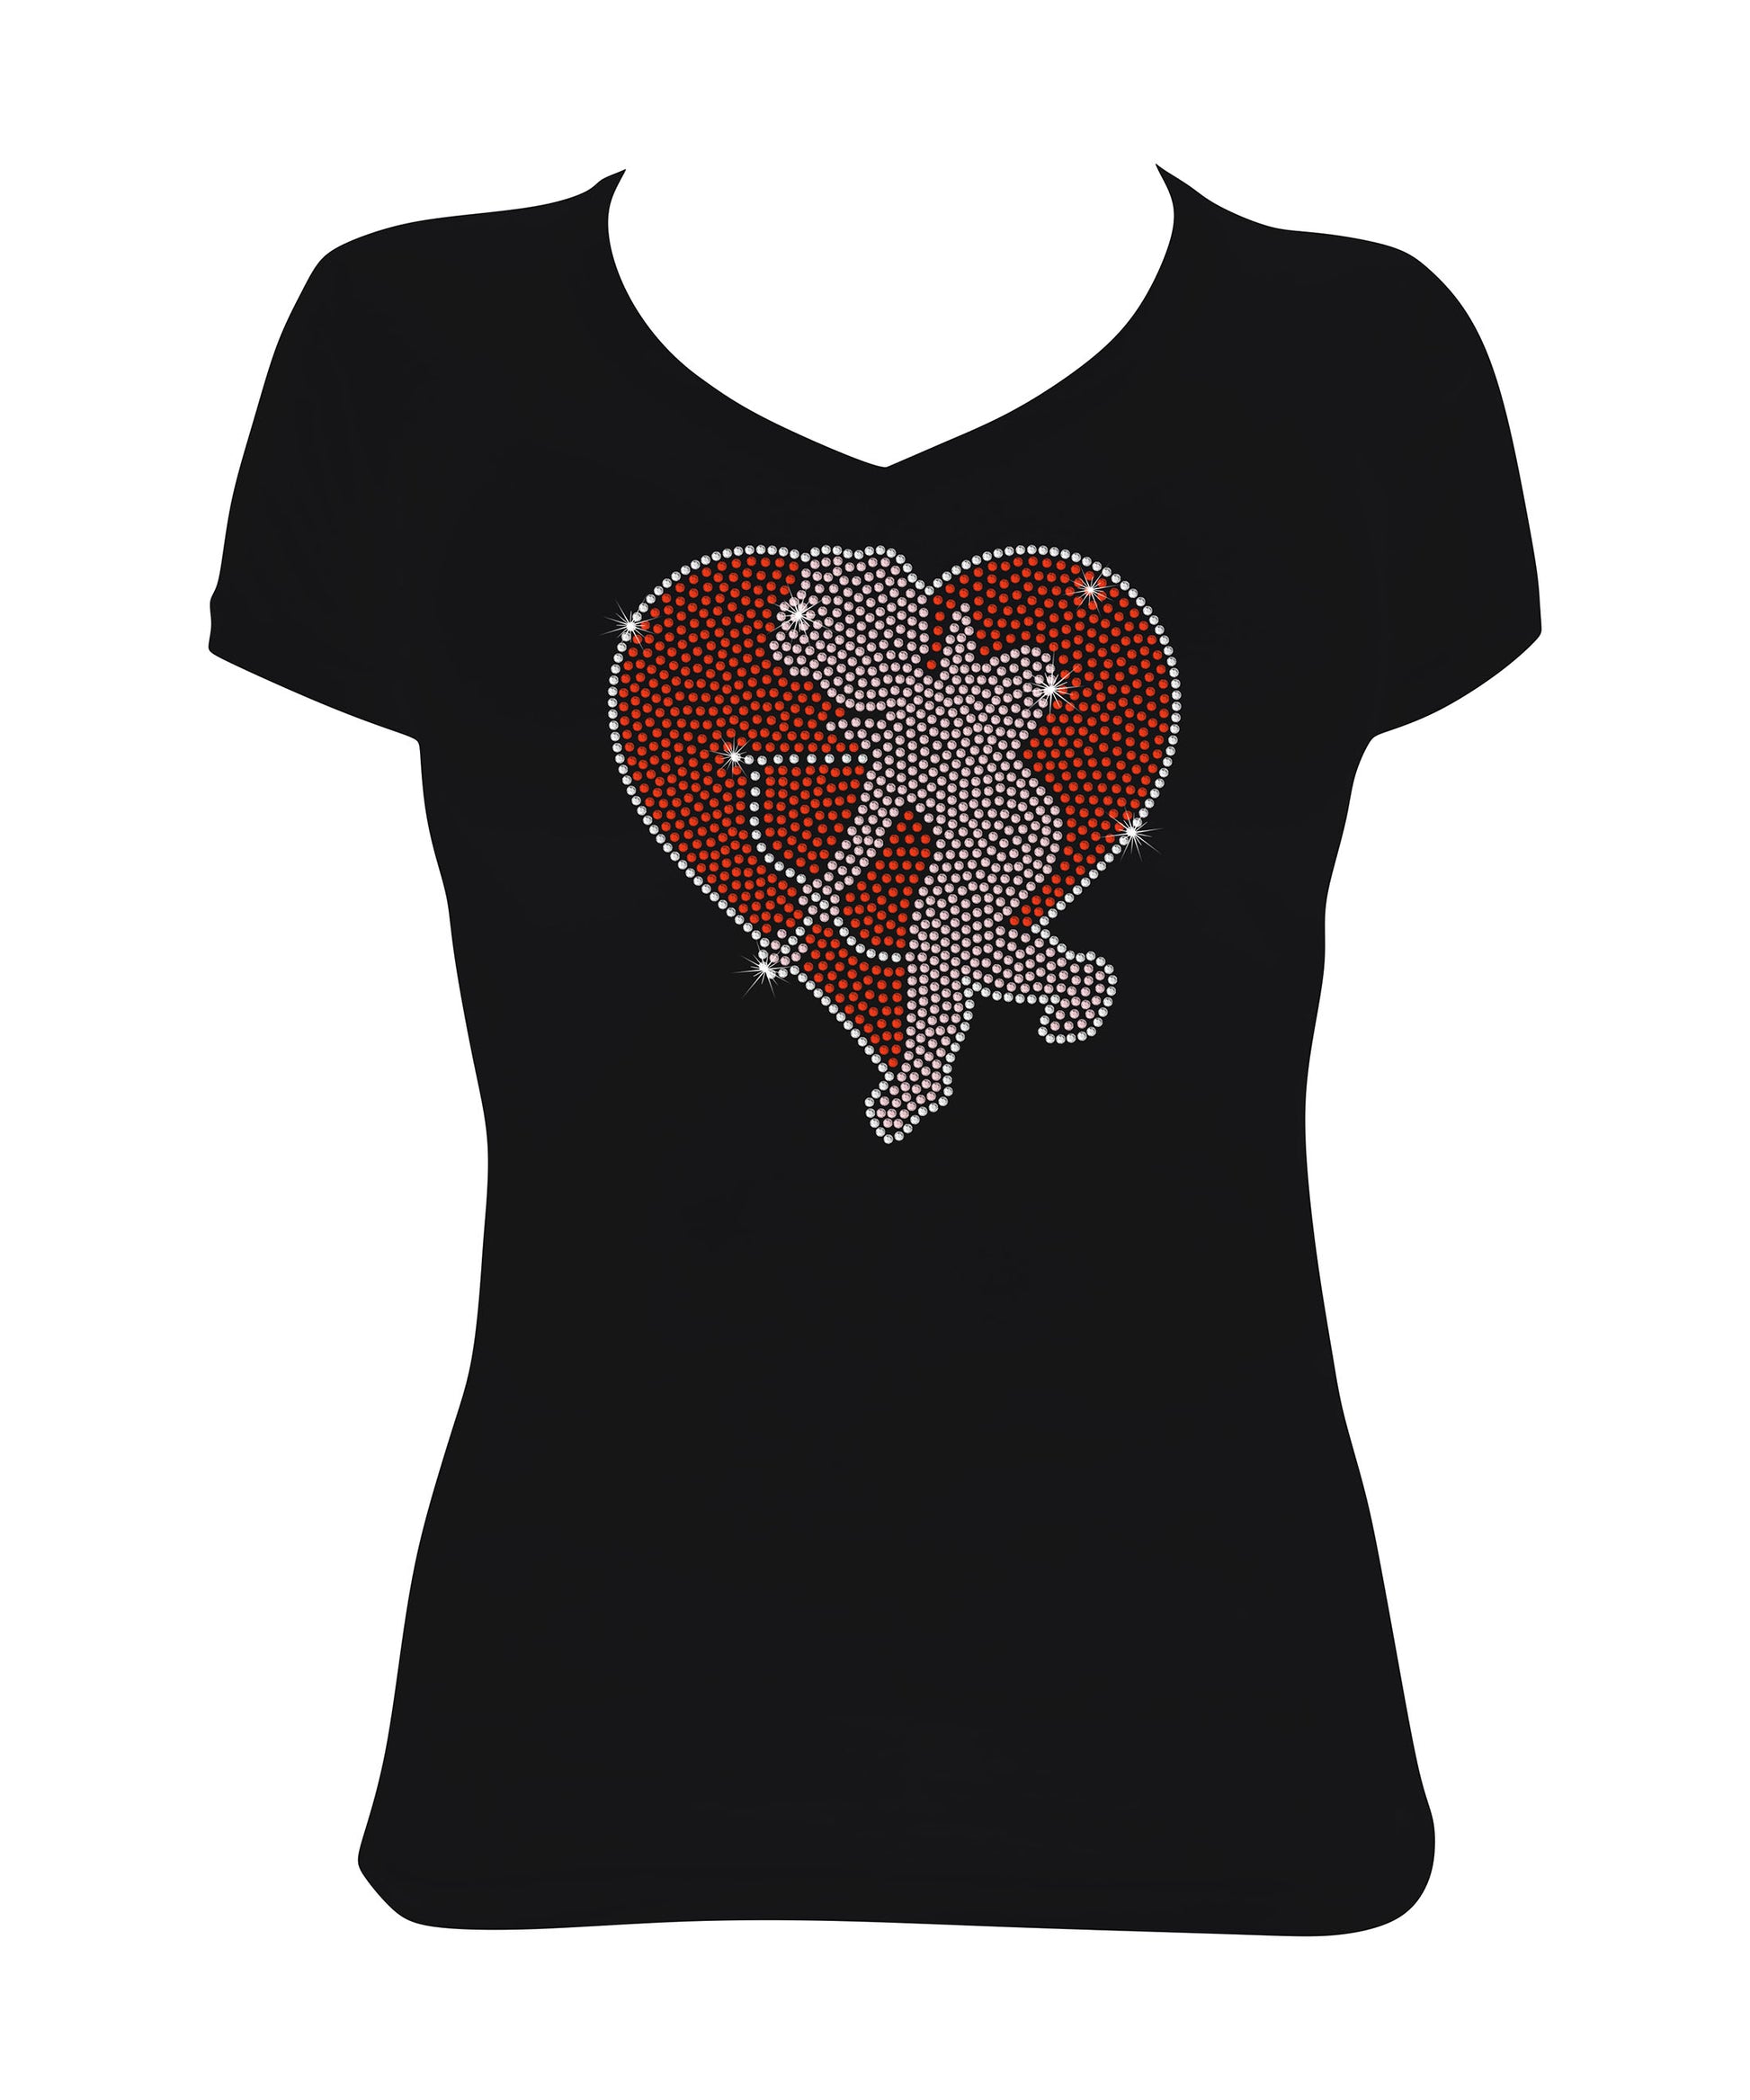 Red Heart with Cupid and His Bow and Arrow - Valentines Shirt